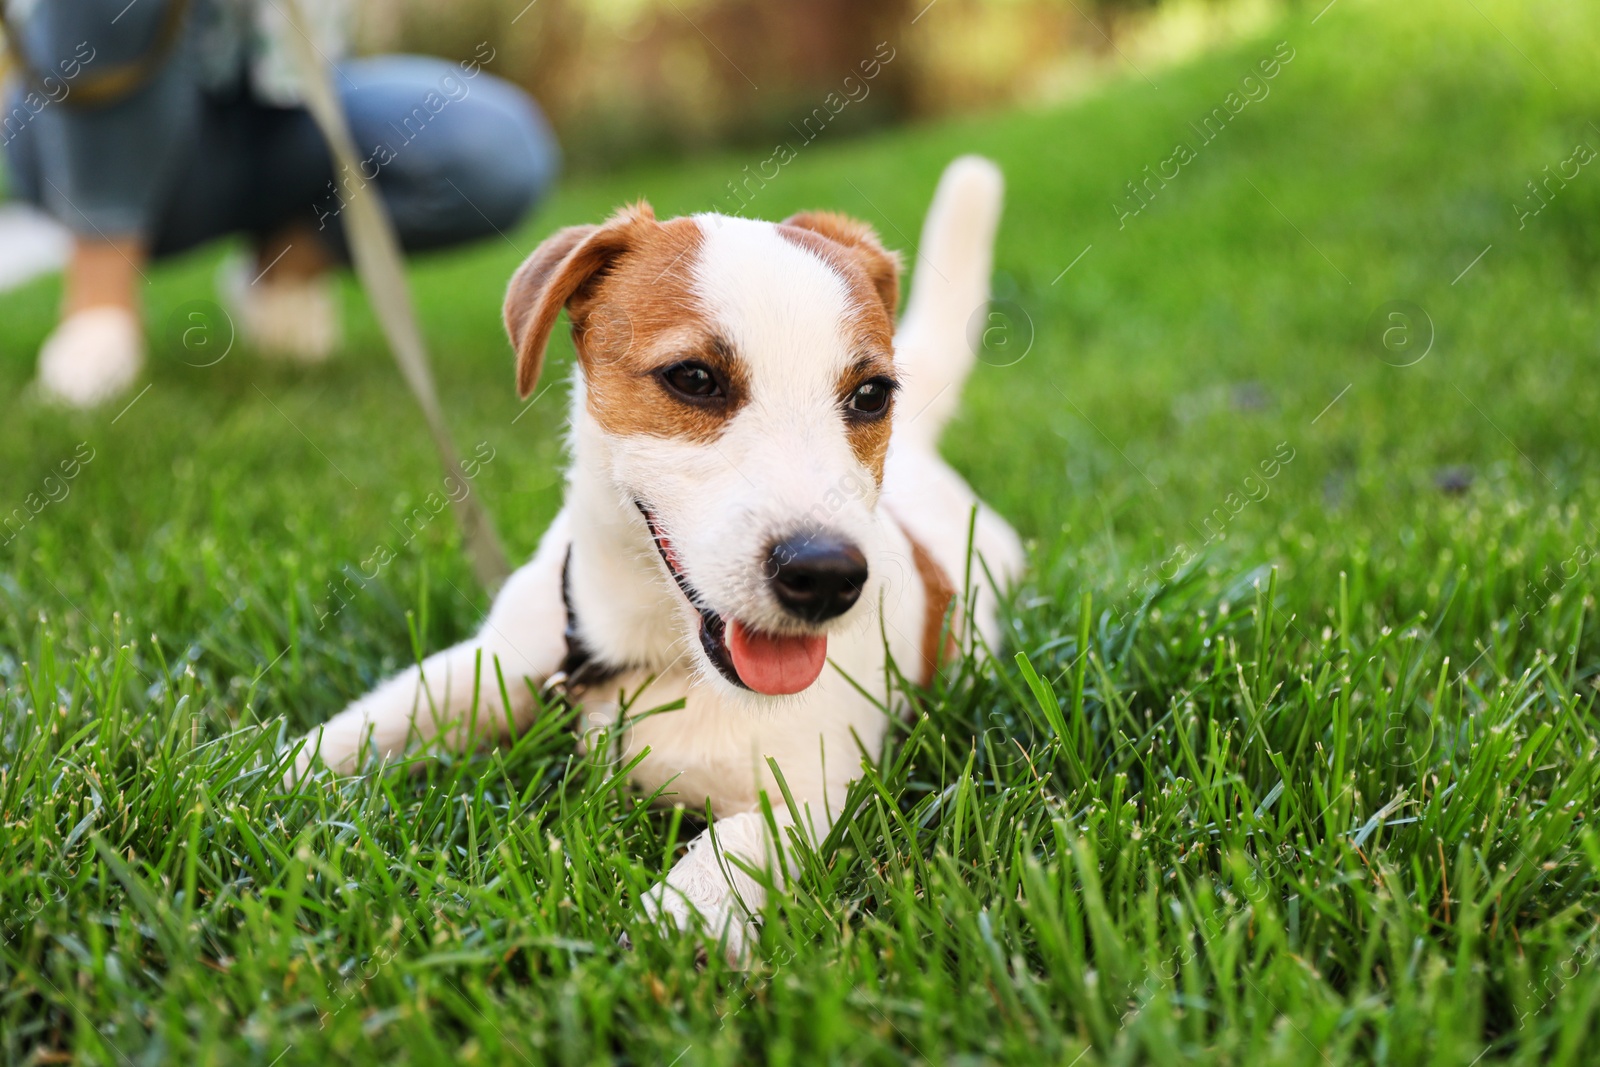 Photo of Adorable Jack Russell Terrier dog on green grass outdoors